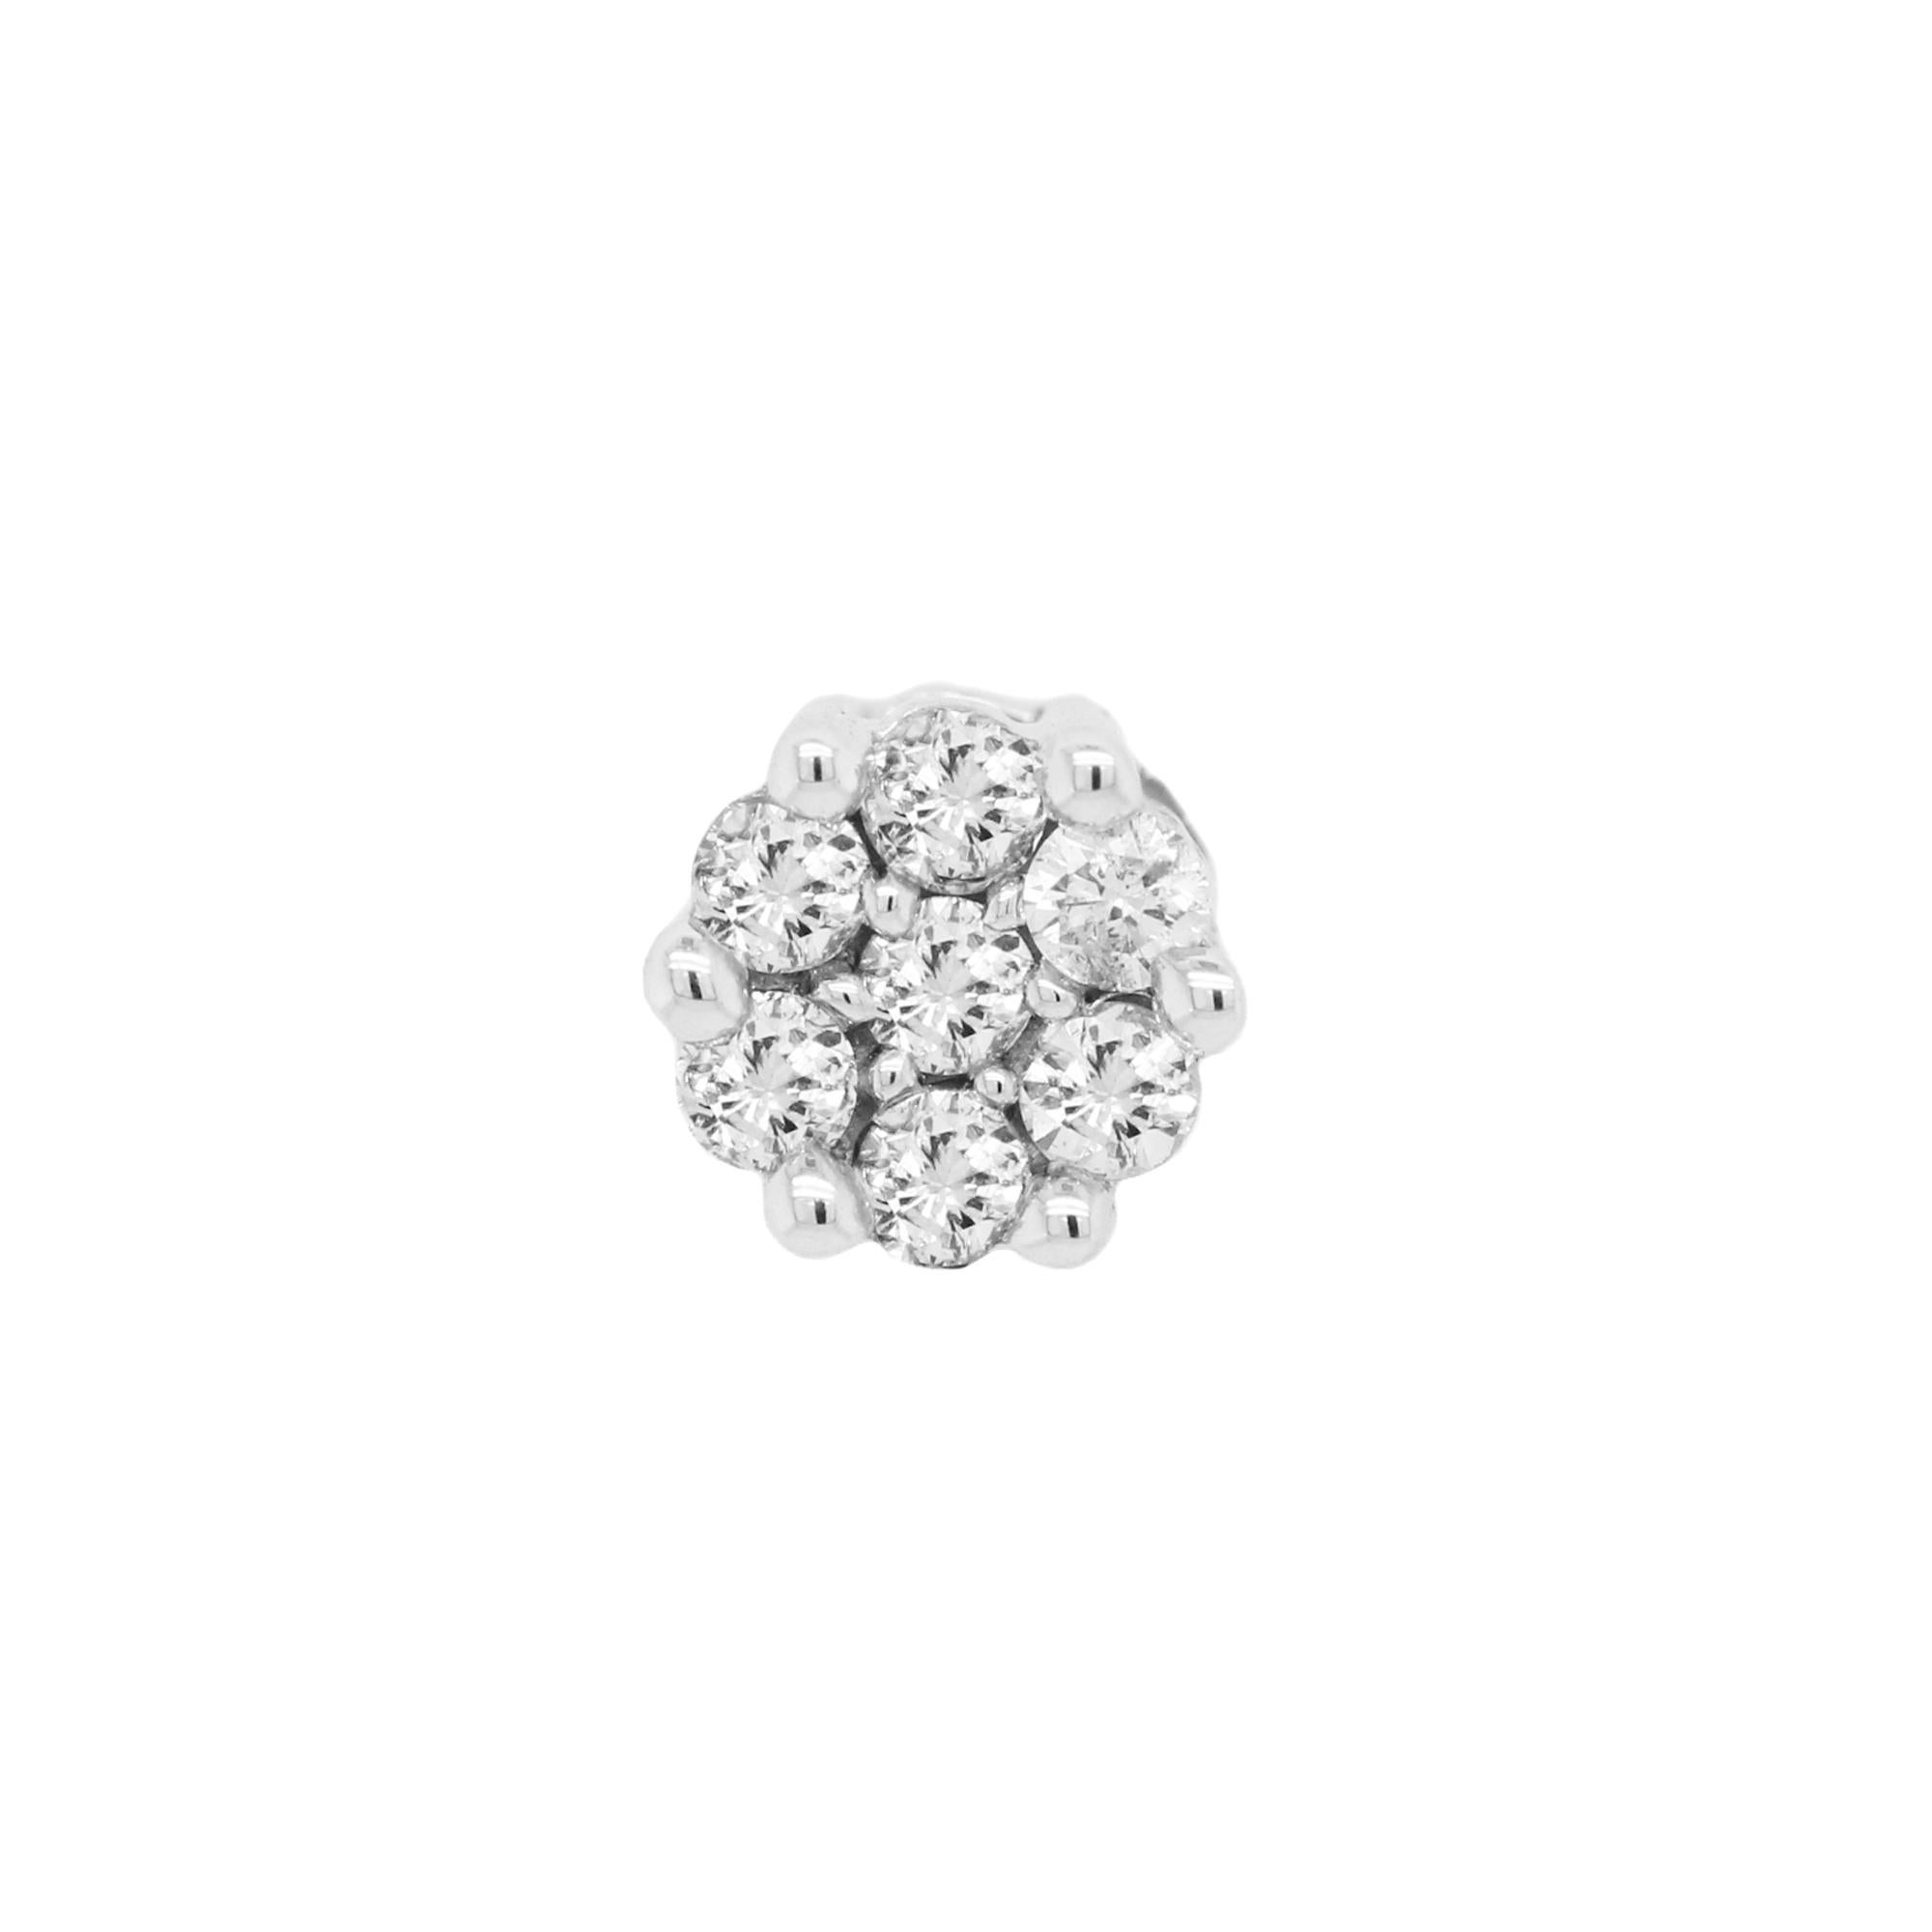 18K White Gold and Diamond Drop Earrings

These state-of-the-art earrings give two uses to wear. The top cluster can be worn by itself as a classic diamond cluster stud earring.

5.25 carat G color, VS clarity diamonds total weight

Earrings are